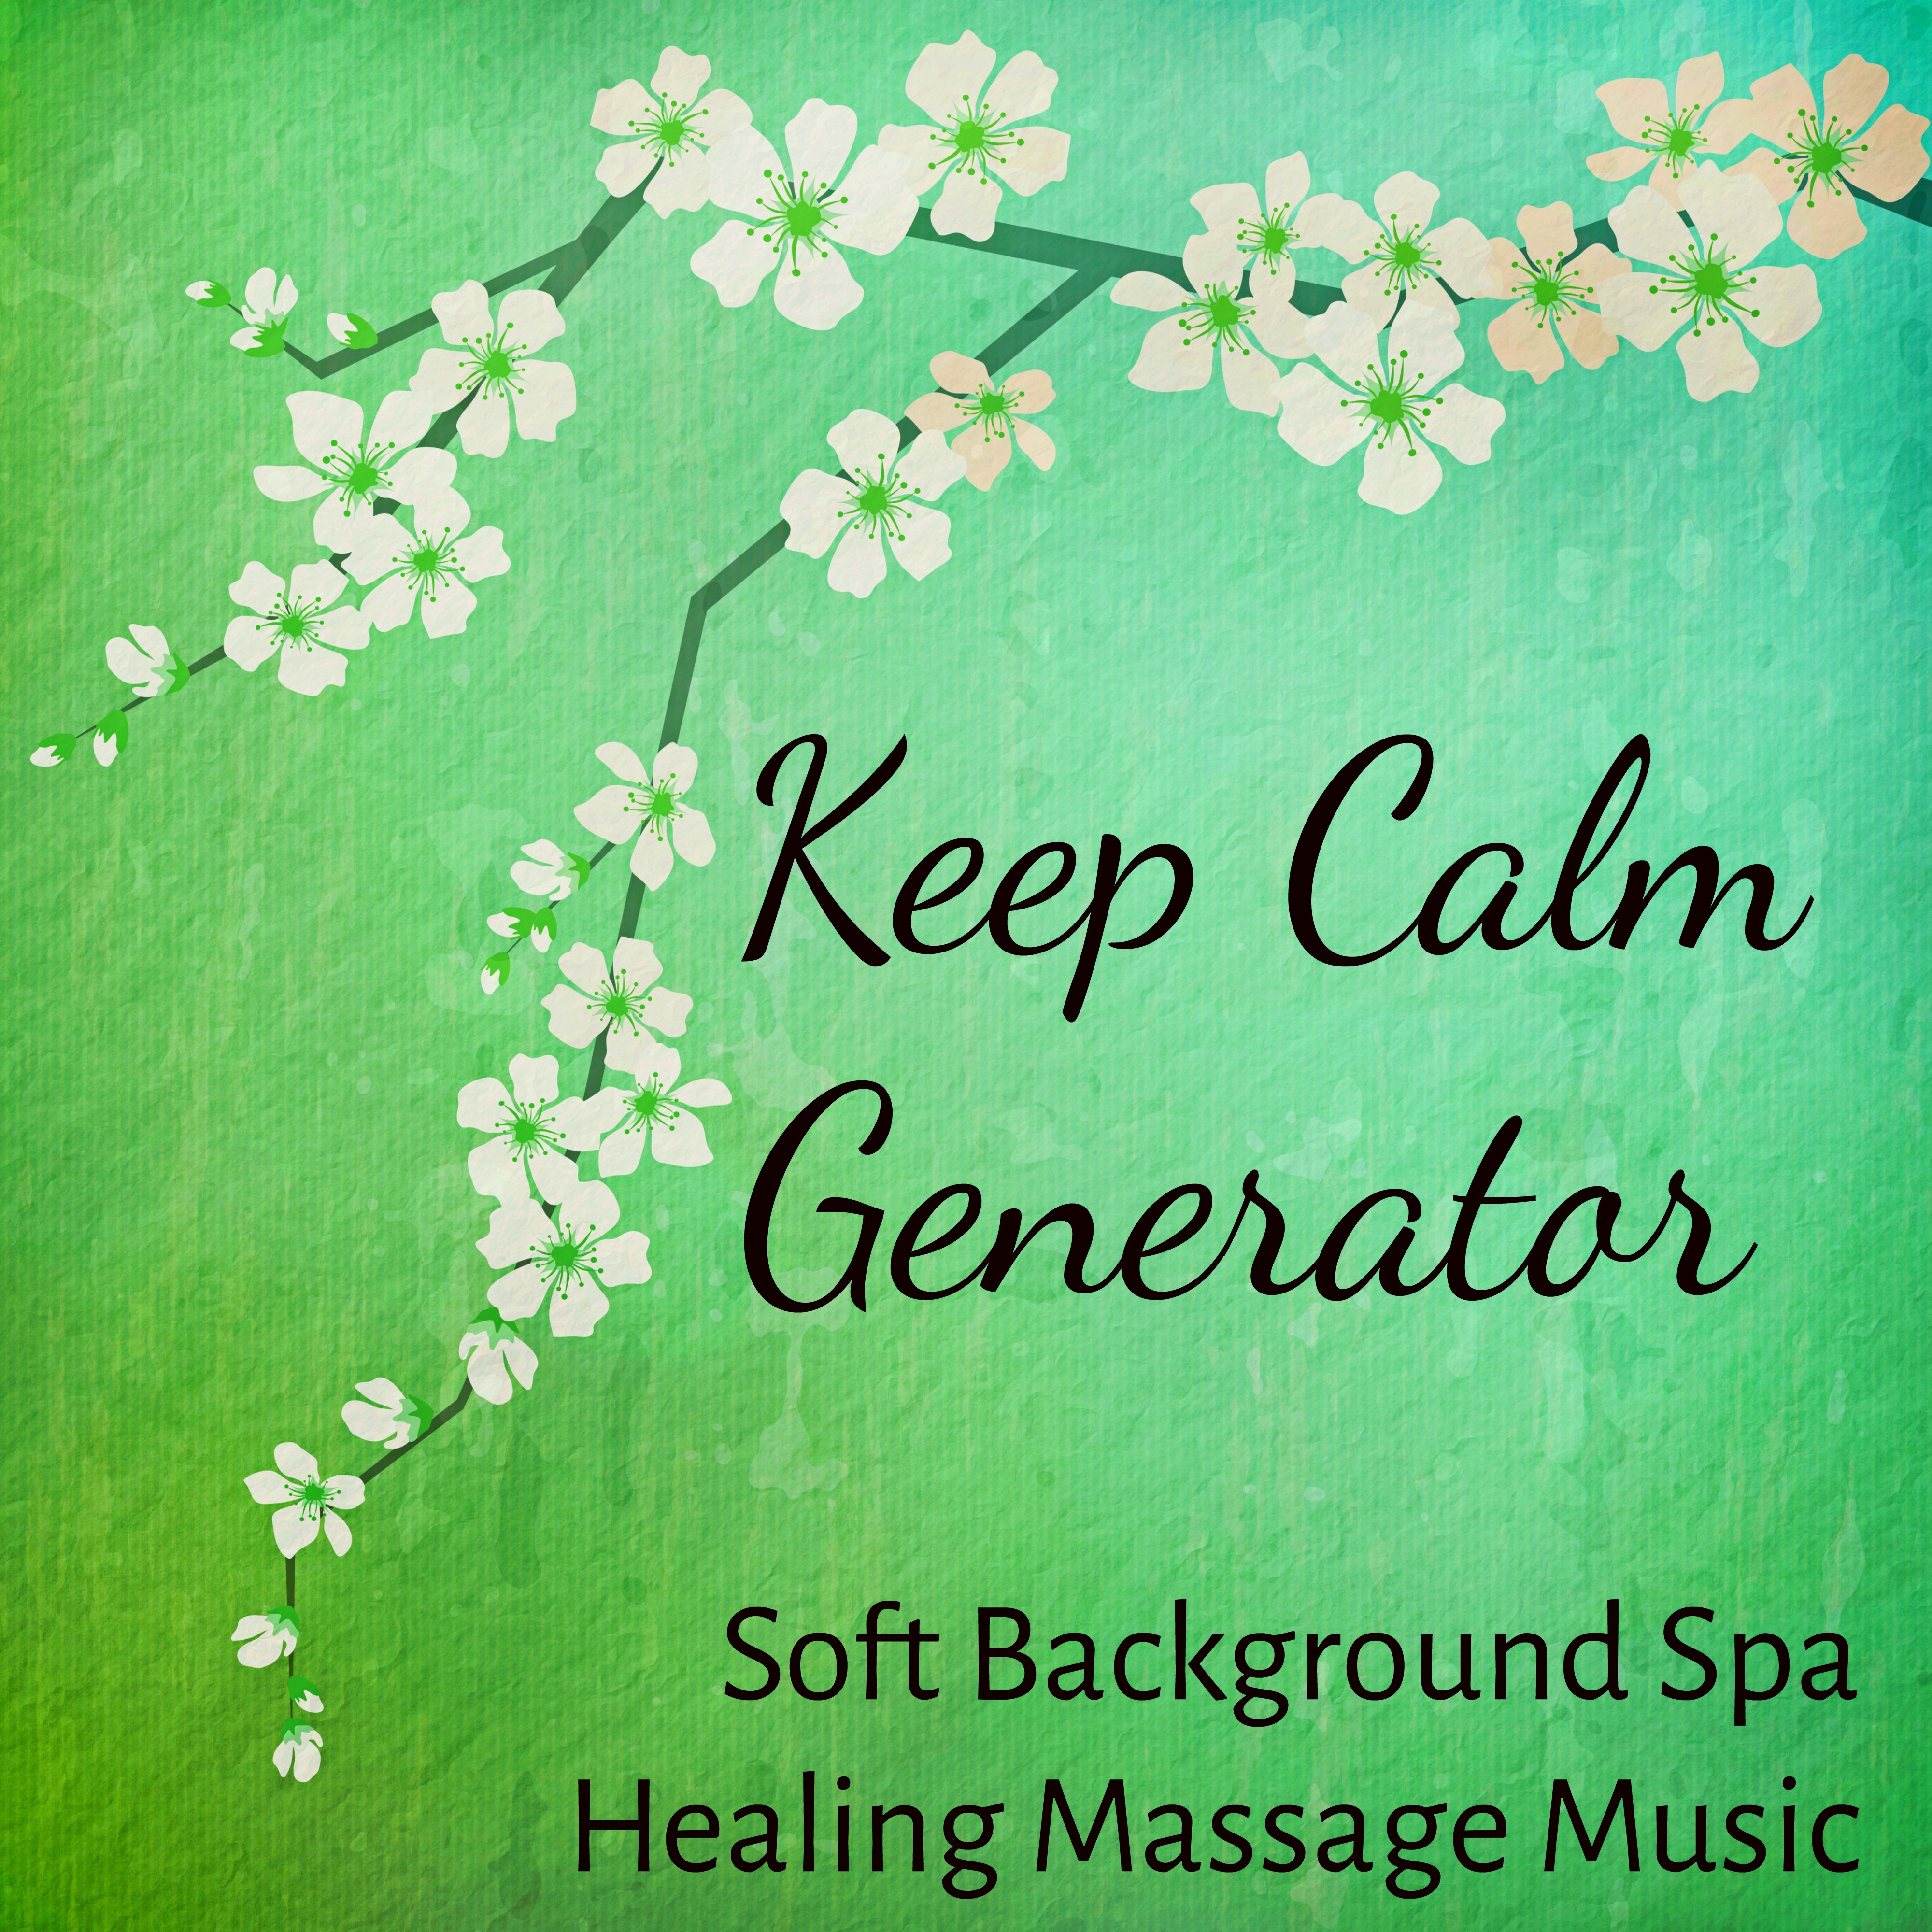 Keep Calm Generator - Soft Background Spa Healing Massage Music for Deep Relaxation Wellness Meditation Time with Natural Instrumental New Age Sounds